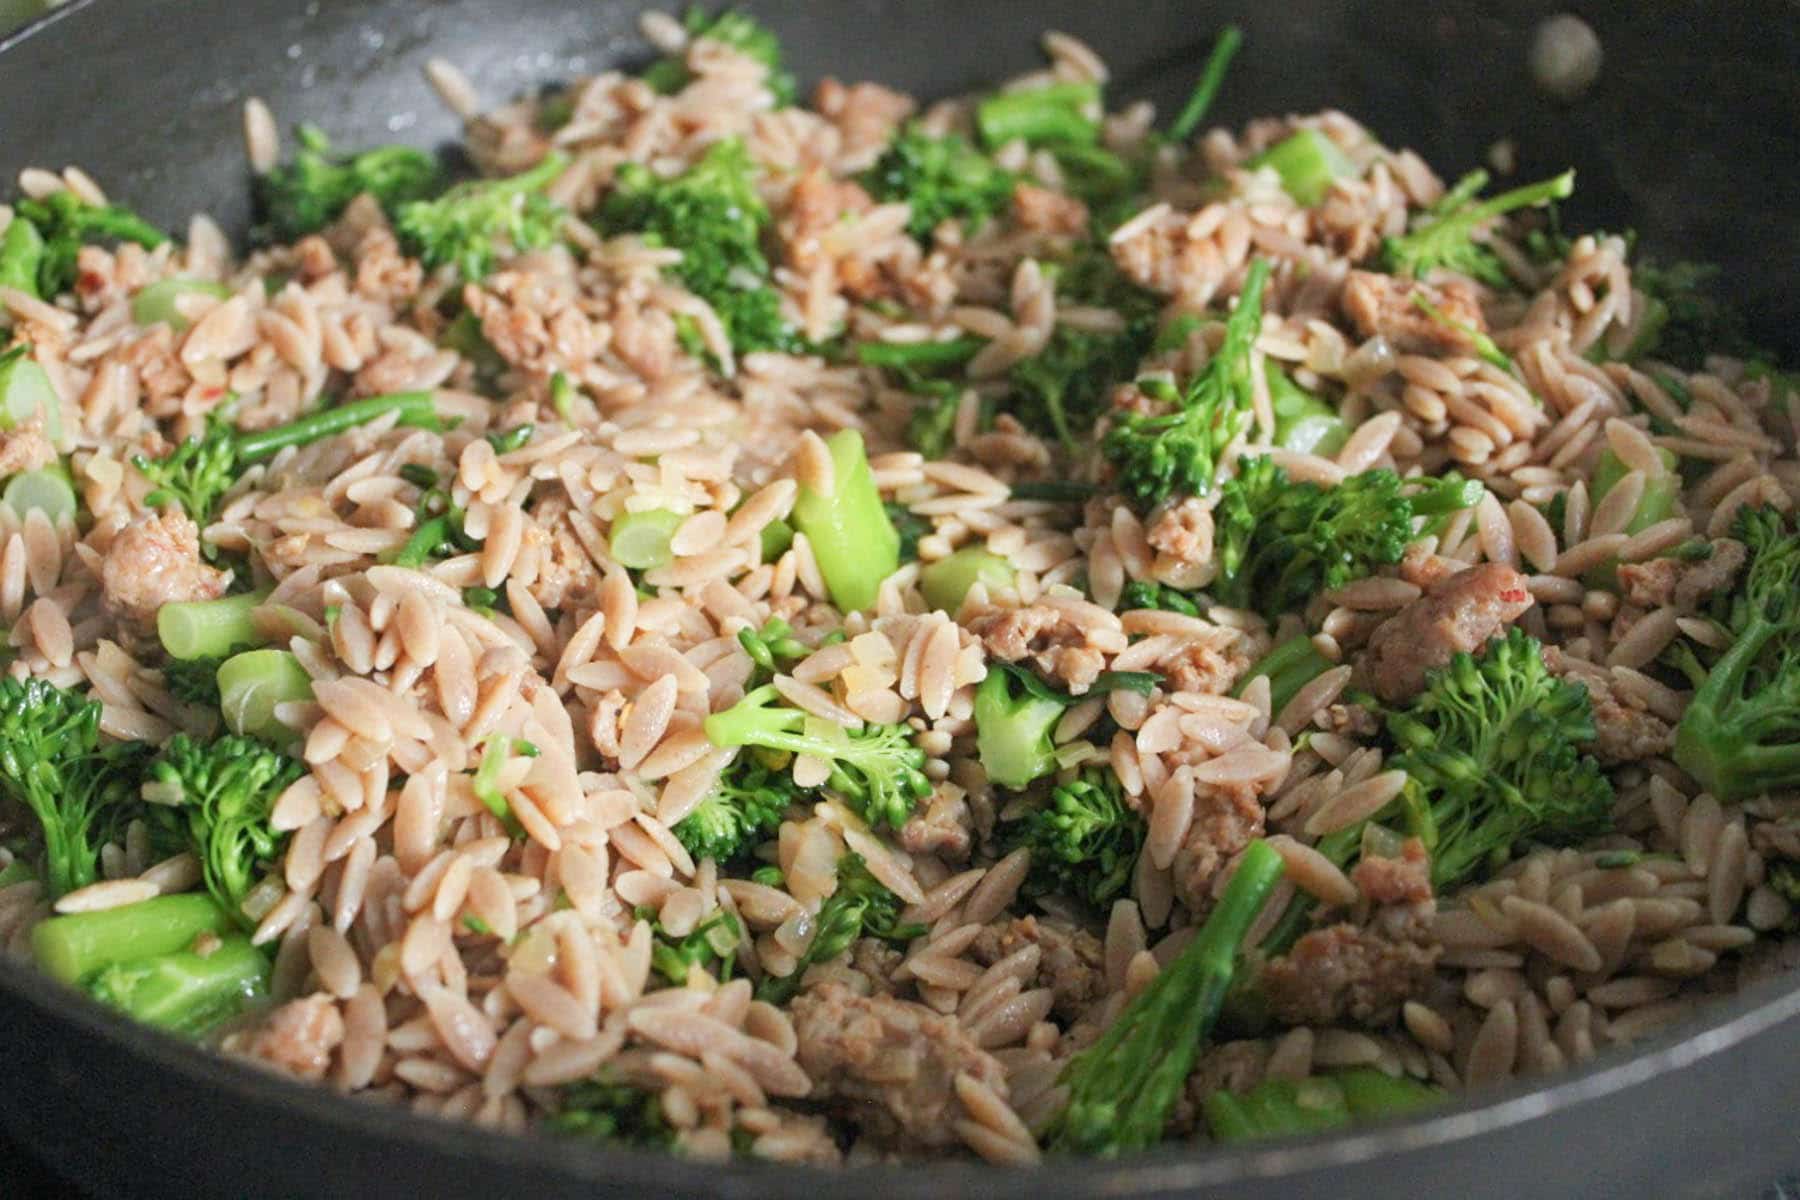 baked-orzo-casserole-with-turkey-sausage-broccolini-fontina-step-6